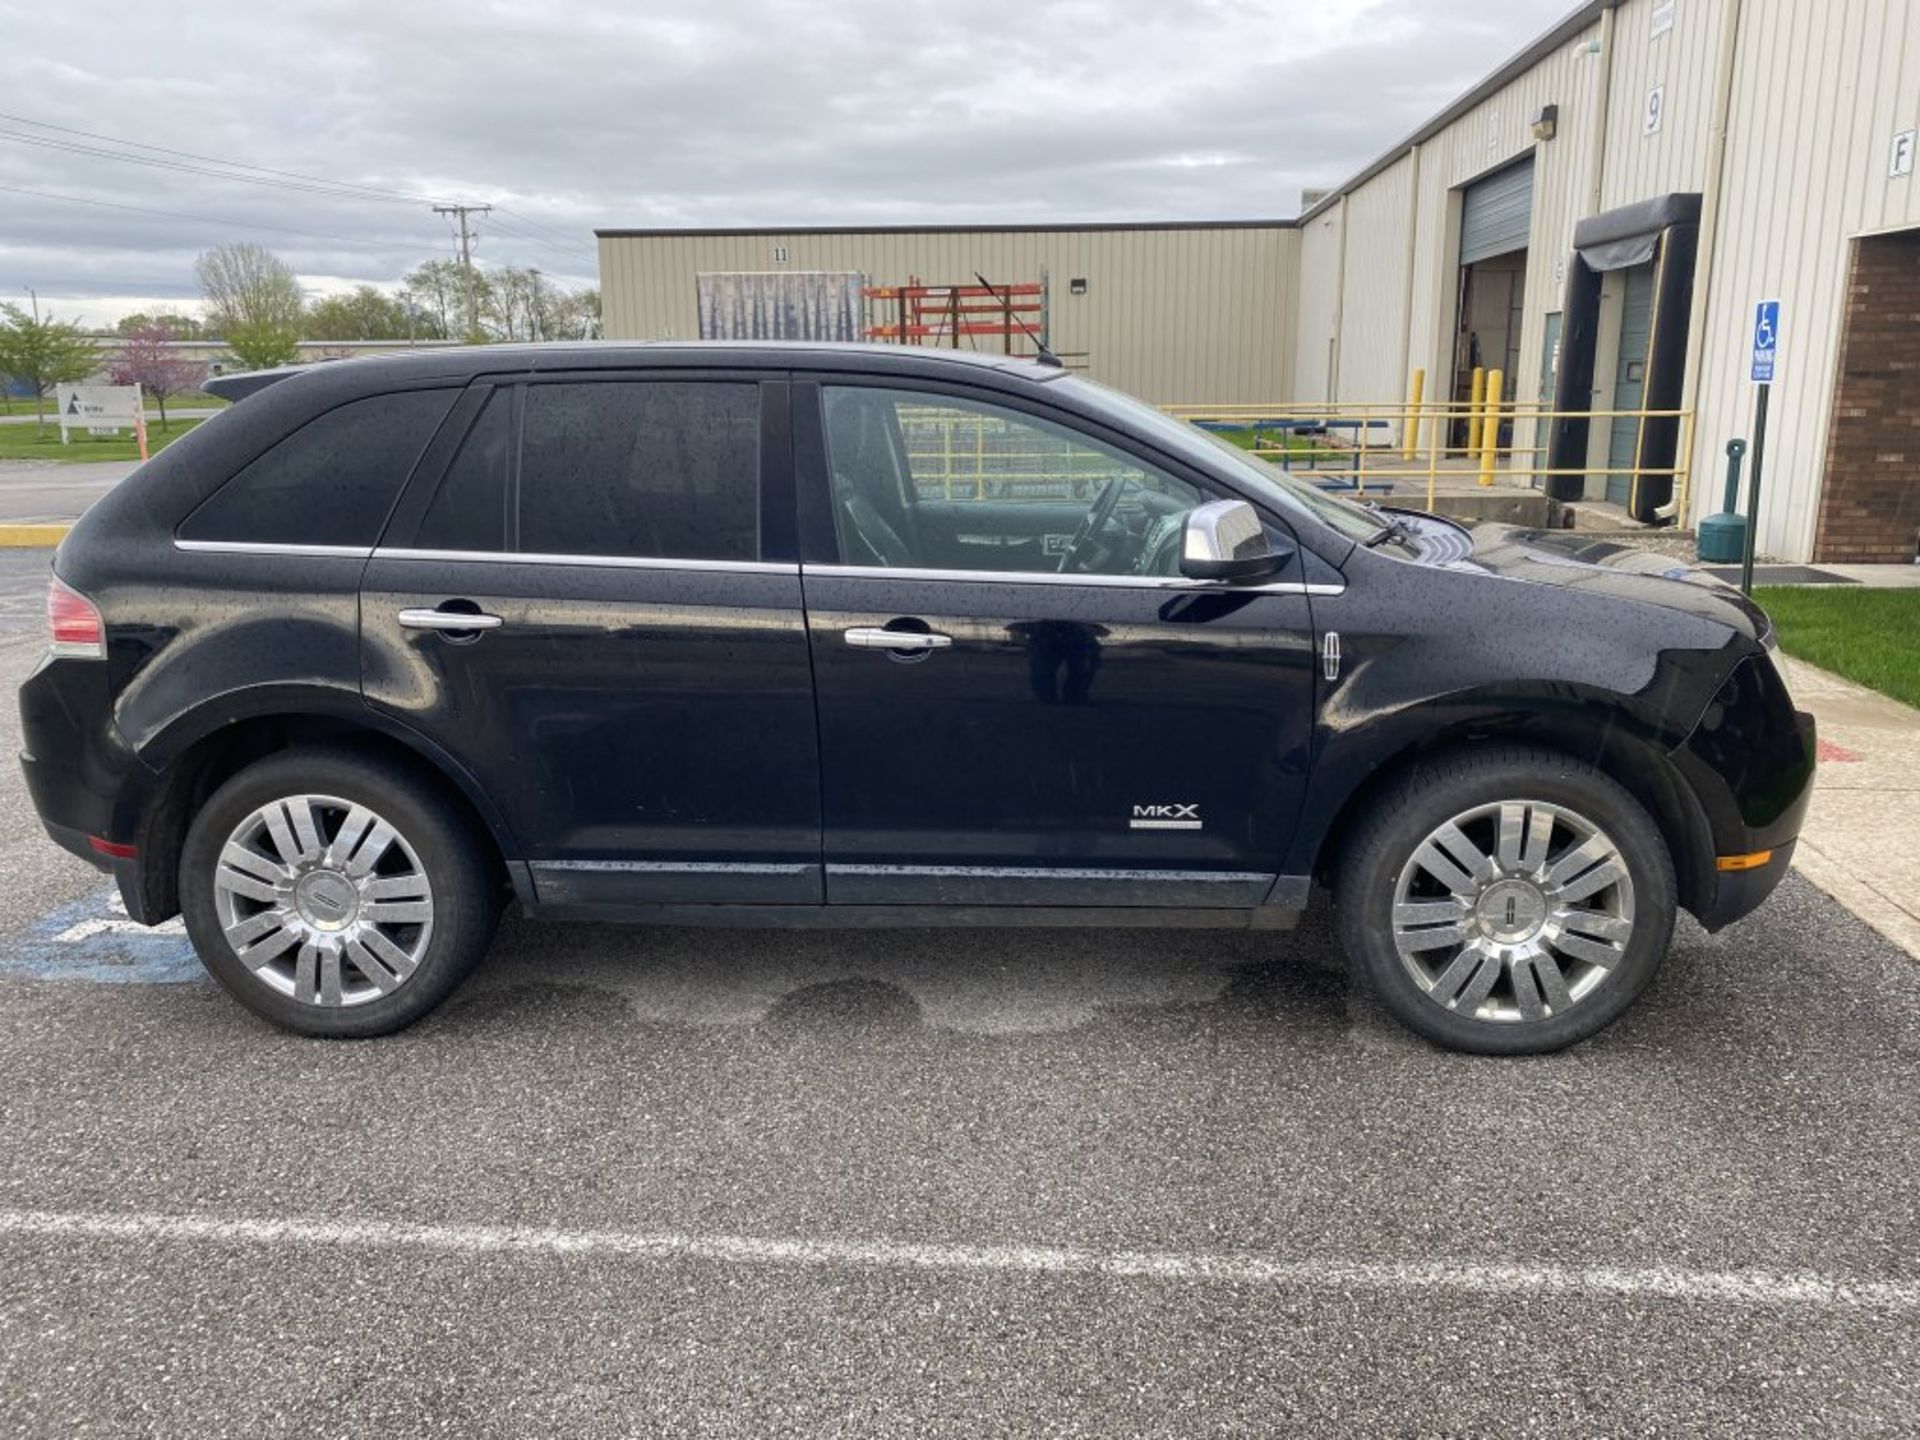 2008 LINCOLN MKX LIMITED EDITION, AUTO TRANS, AM/FM-CD-AUX, HEAT/AC SEATS, MOONROOF, PW, PL, - Image 6 of 21